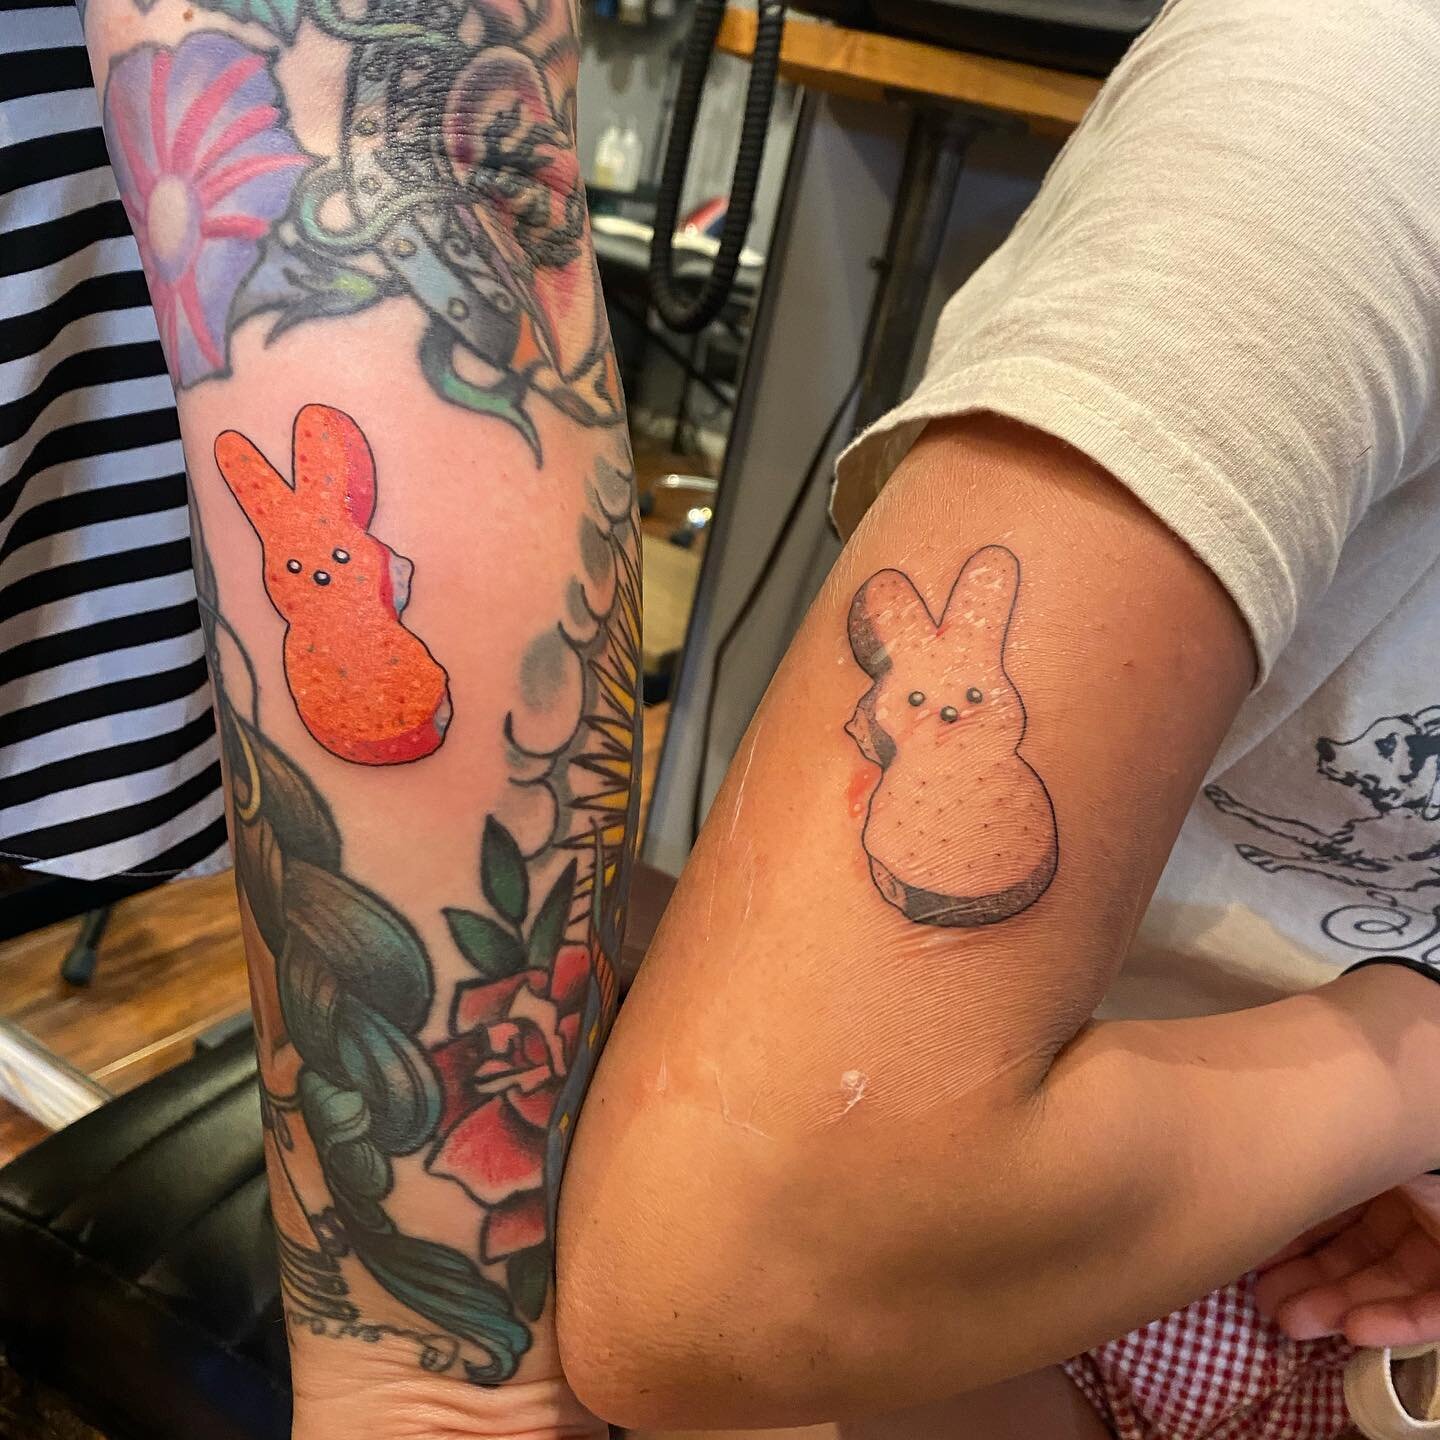 peep these twin easter bunny peeps by @paper_dogs ! thanks for coming in! 

#tattoo #customtattoo #losangelestattoo #losangelestattooartist #rabblerousertattoo #tattooart #peepthepeeps #matchingtattoos